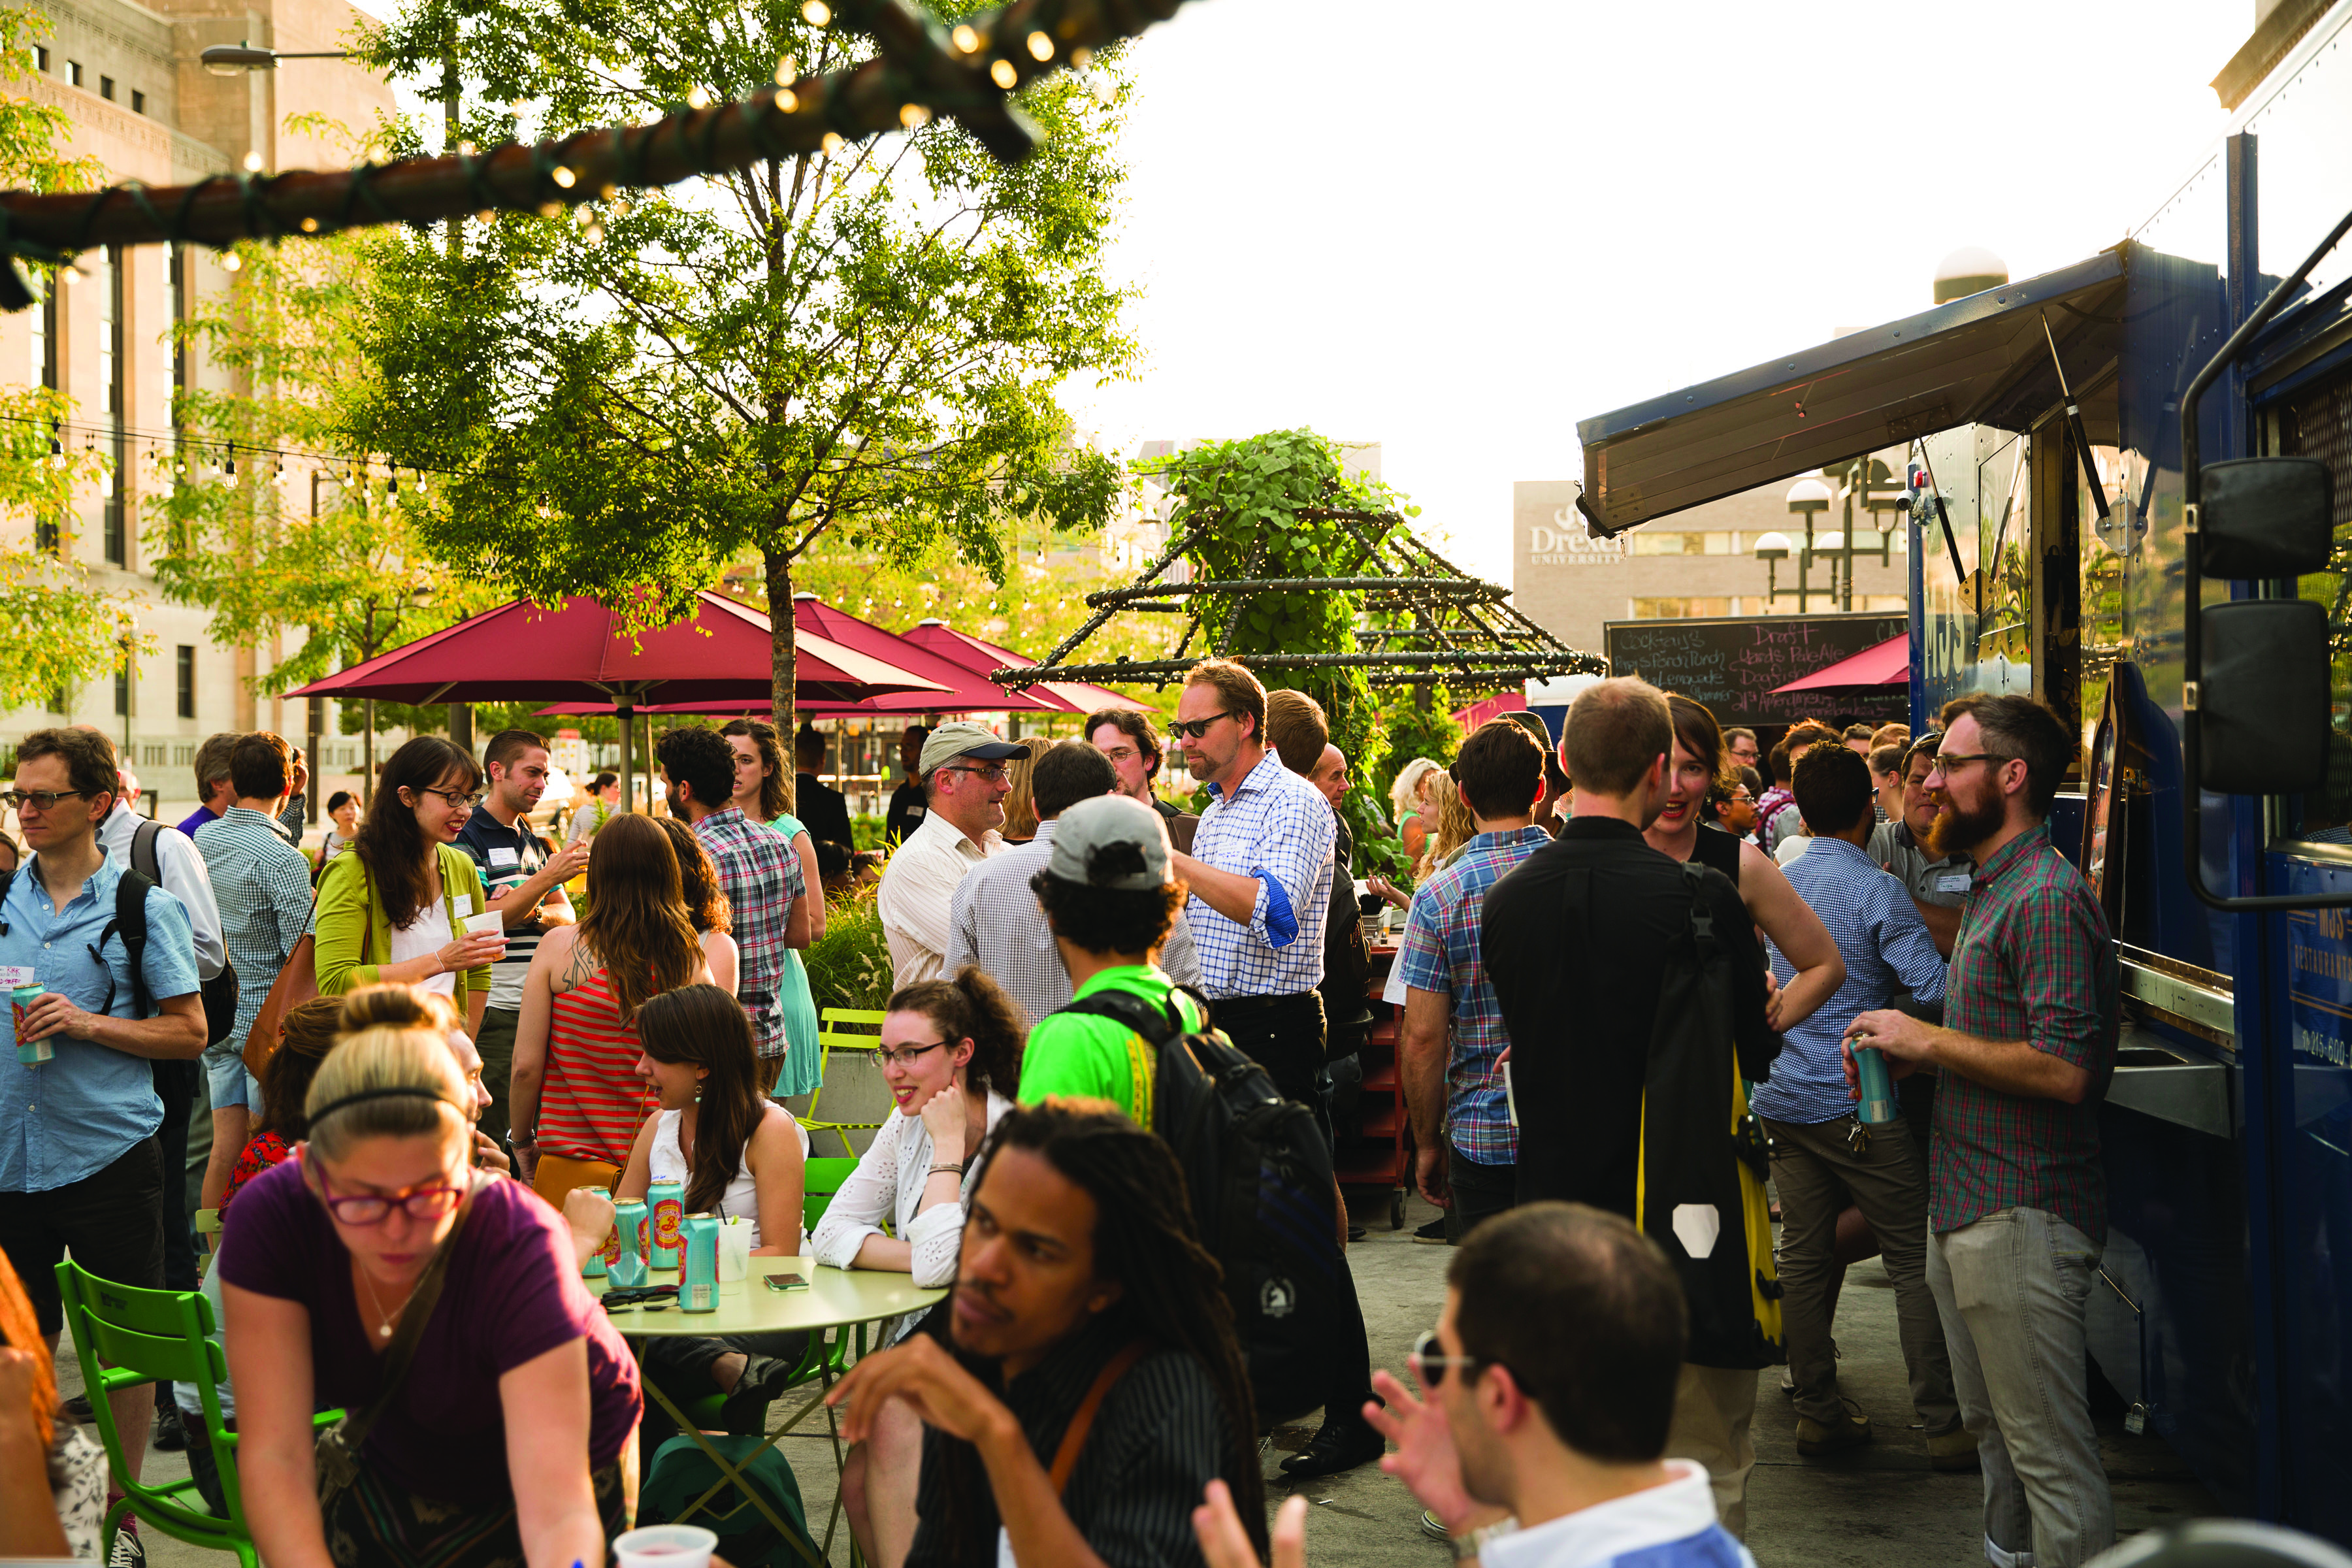 A new beer garden draws a large crowd in July of 2015